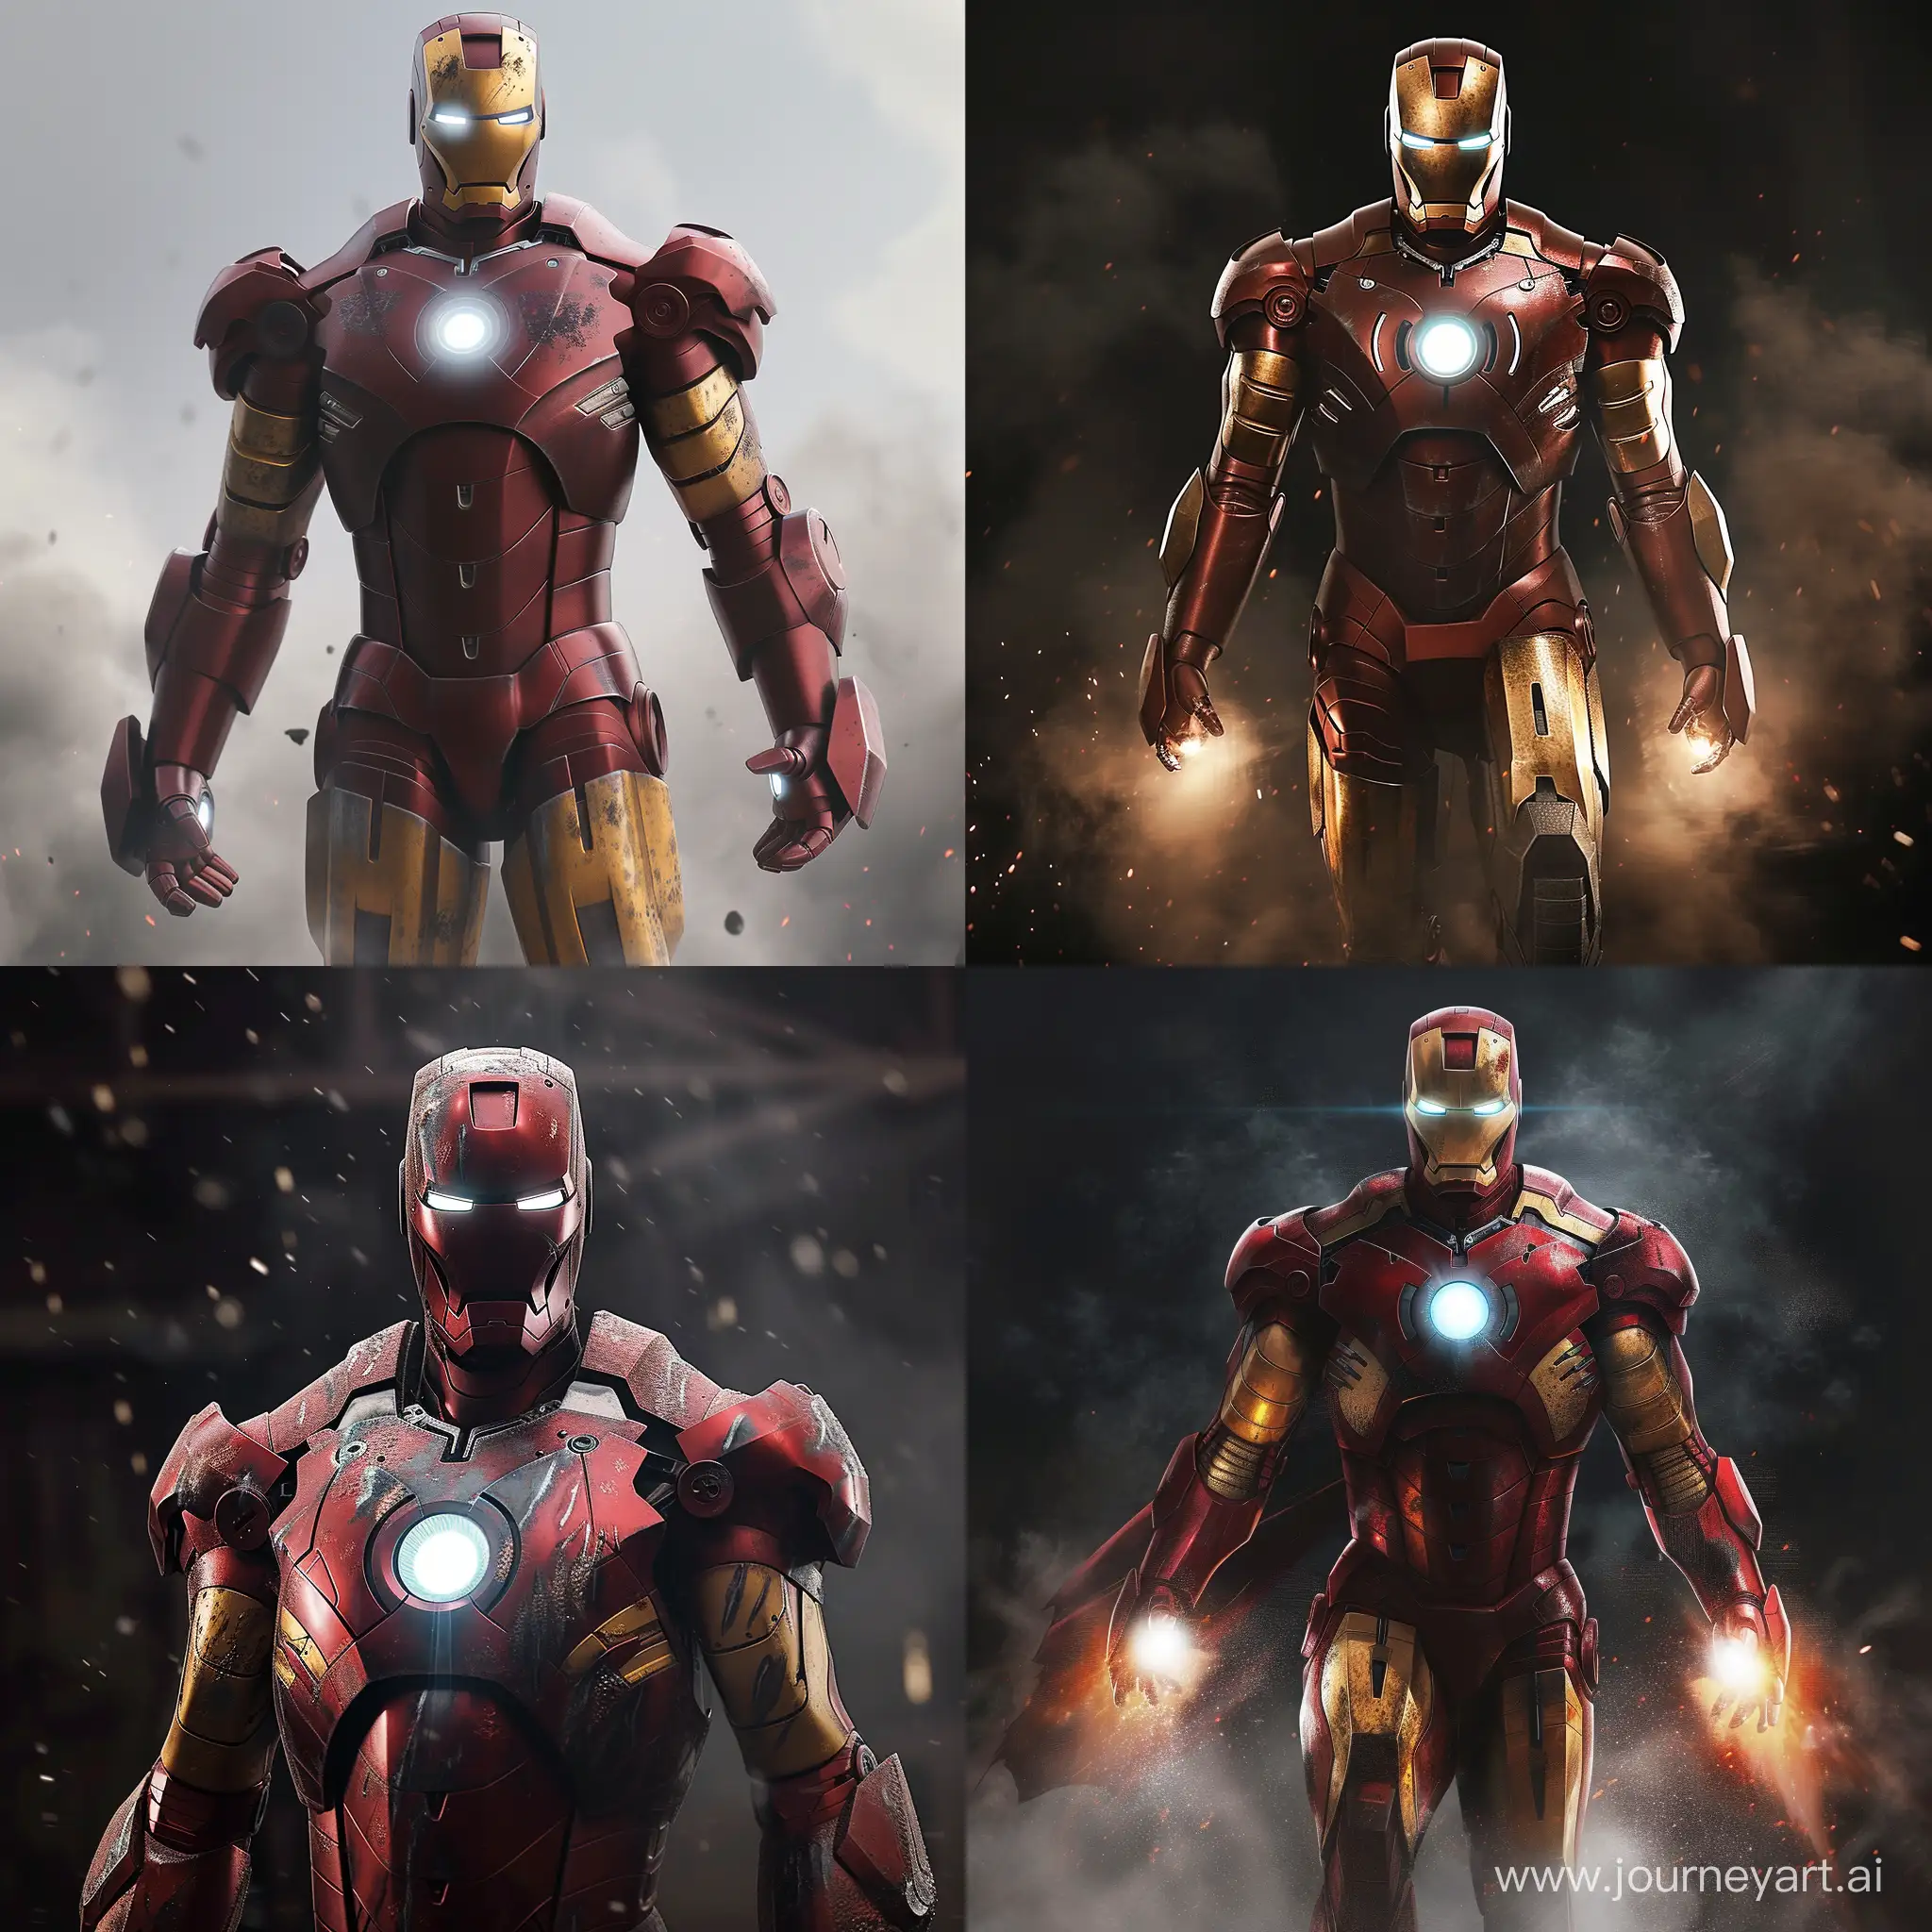 Futuristic-Iron-Man-Suit-Version-6-in-Dynamic-Action